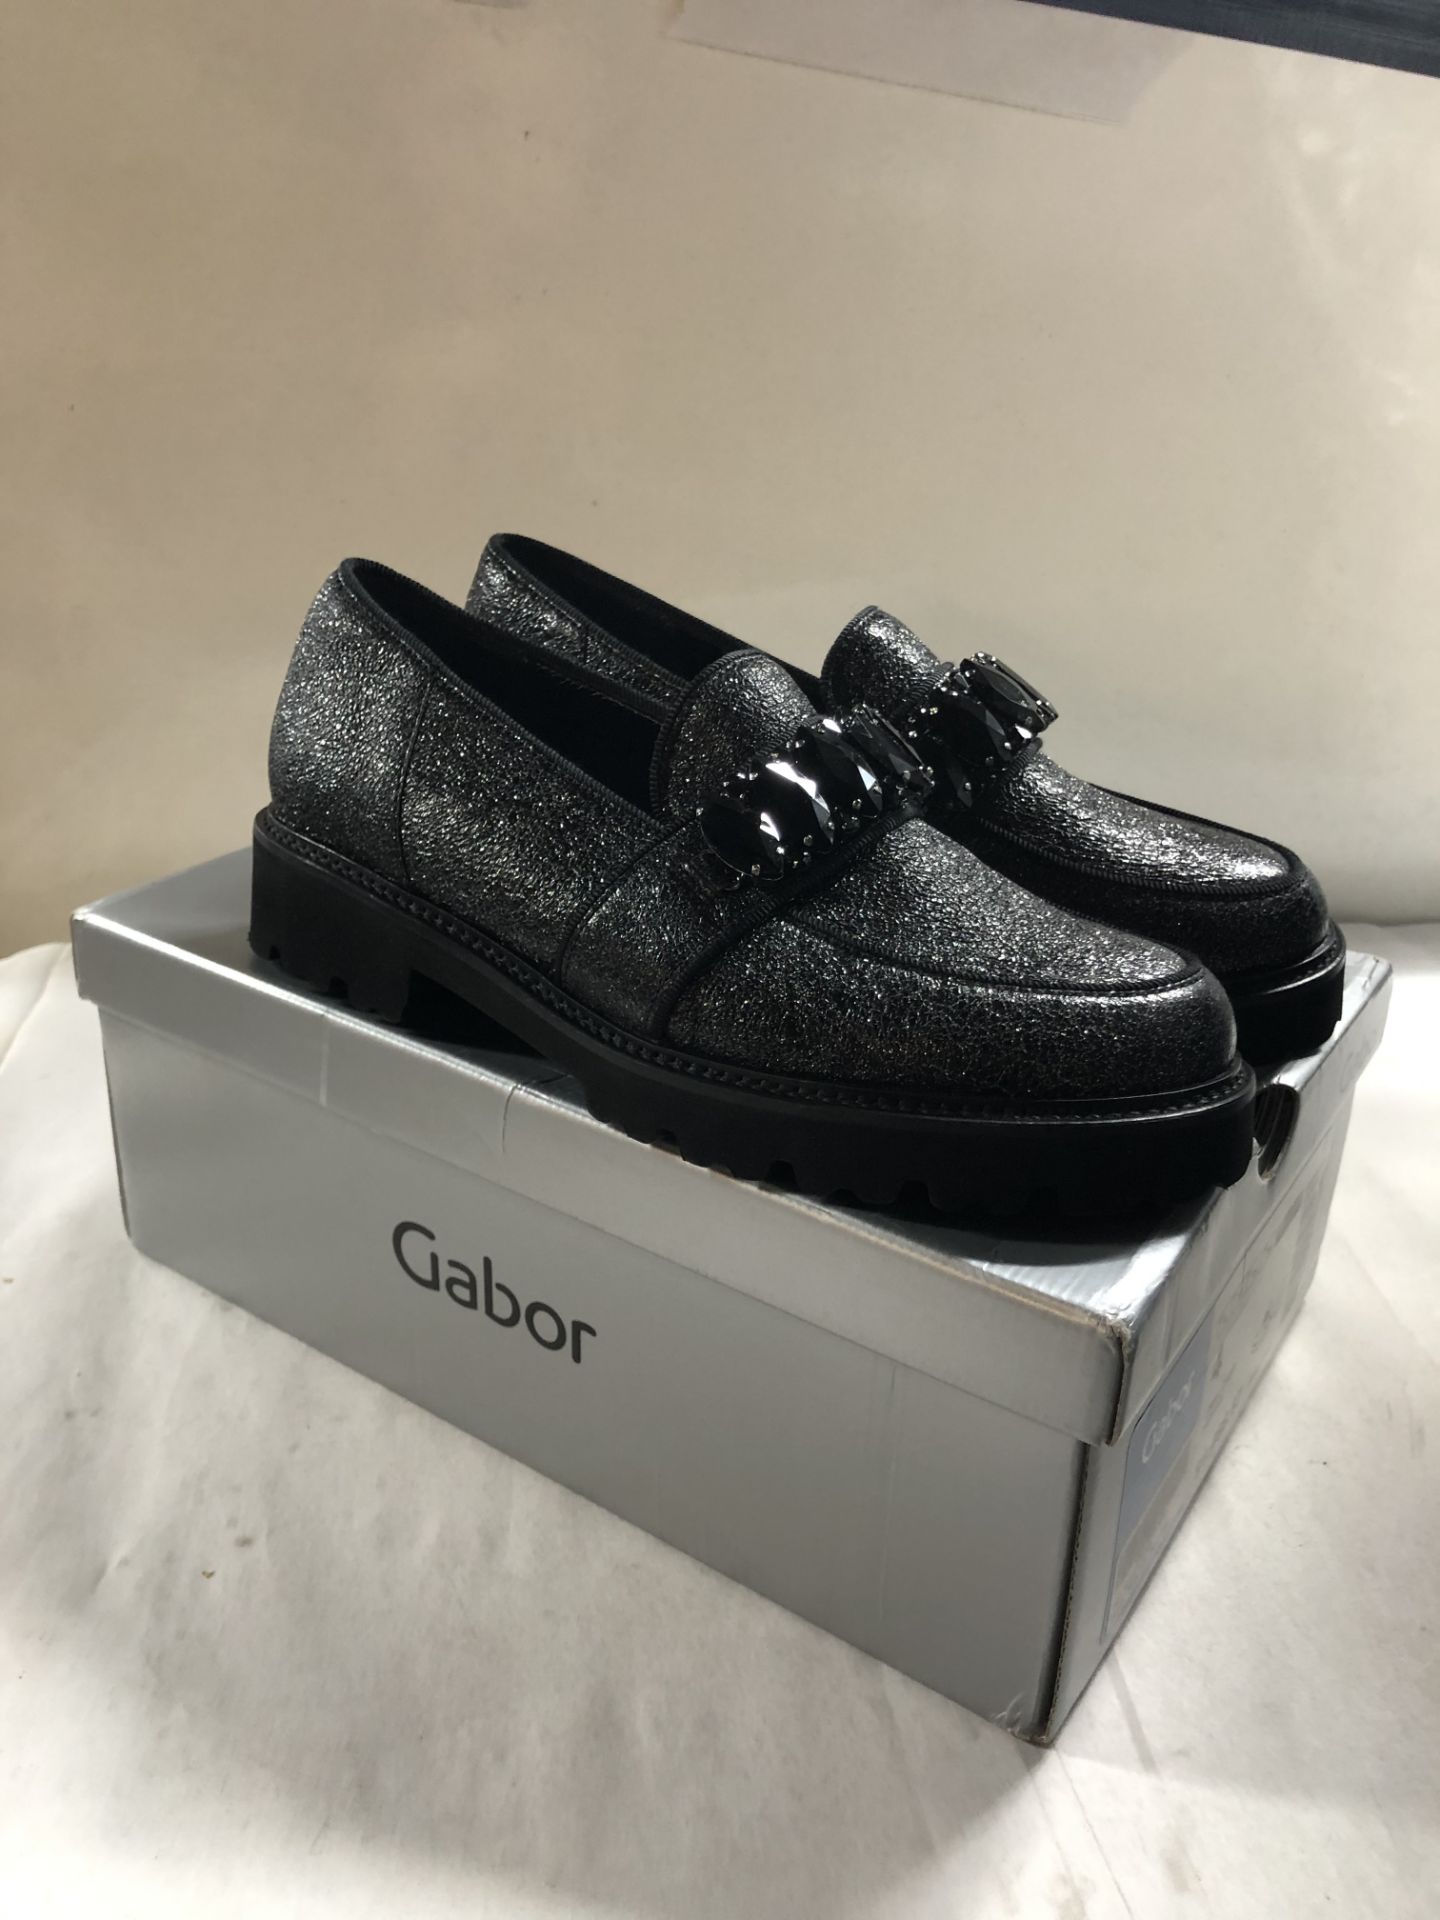 Gabor Loafers. UK 4 - Image 2 of 4